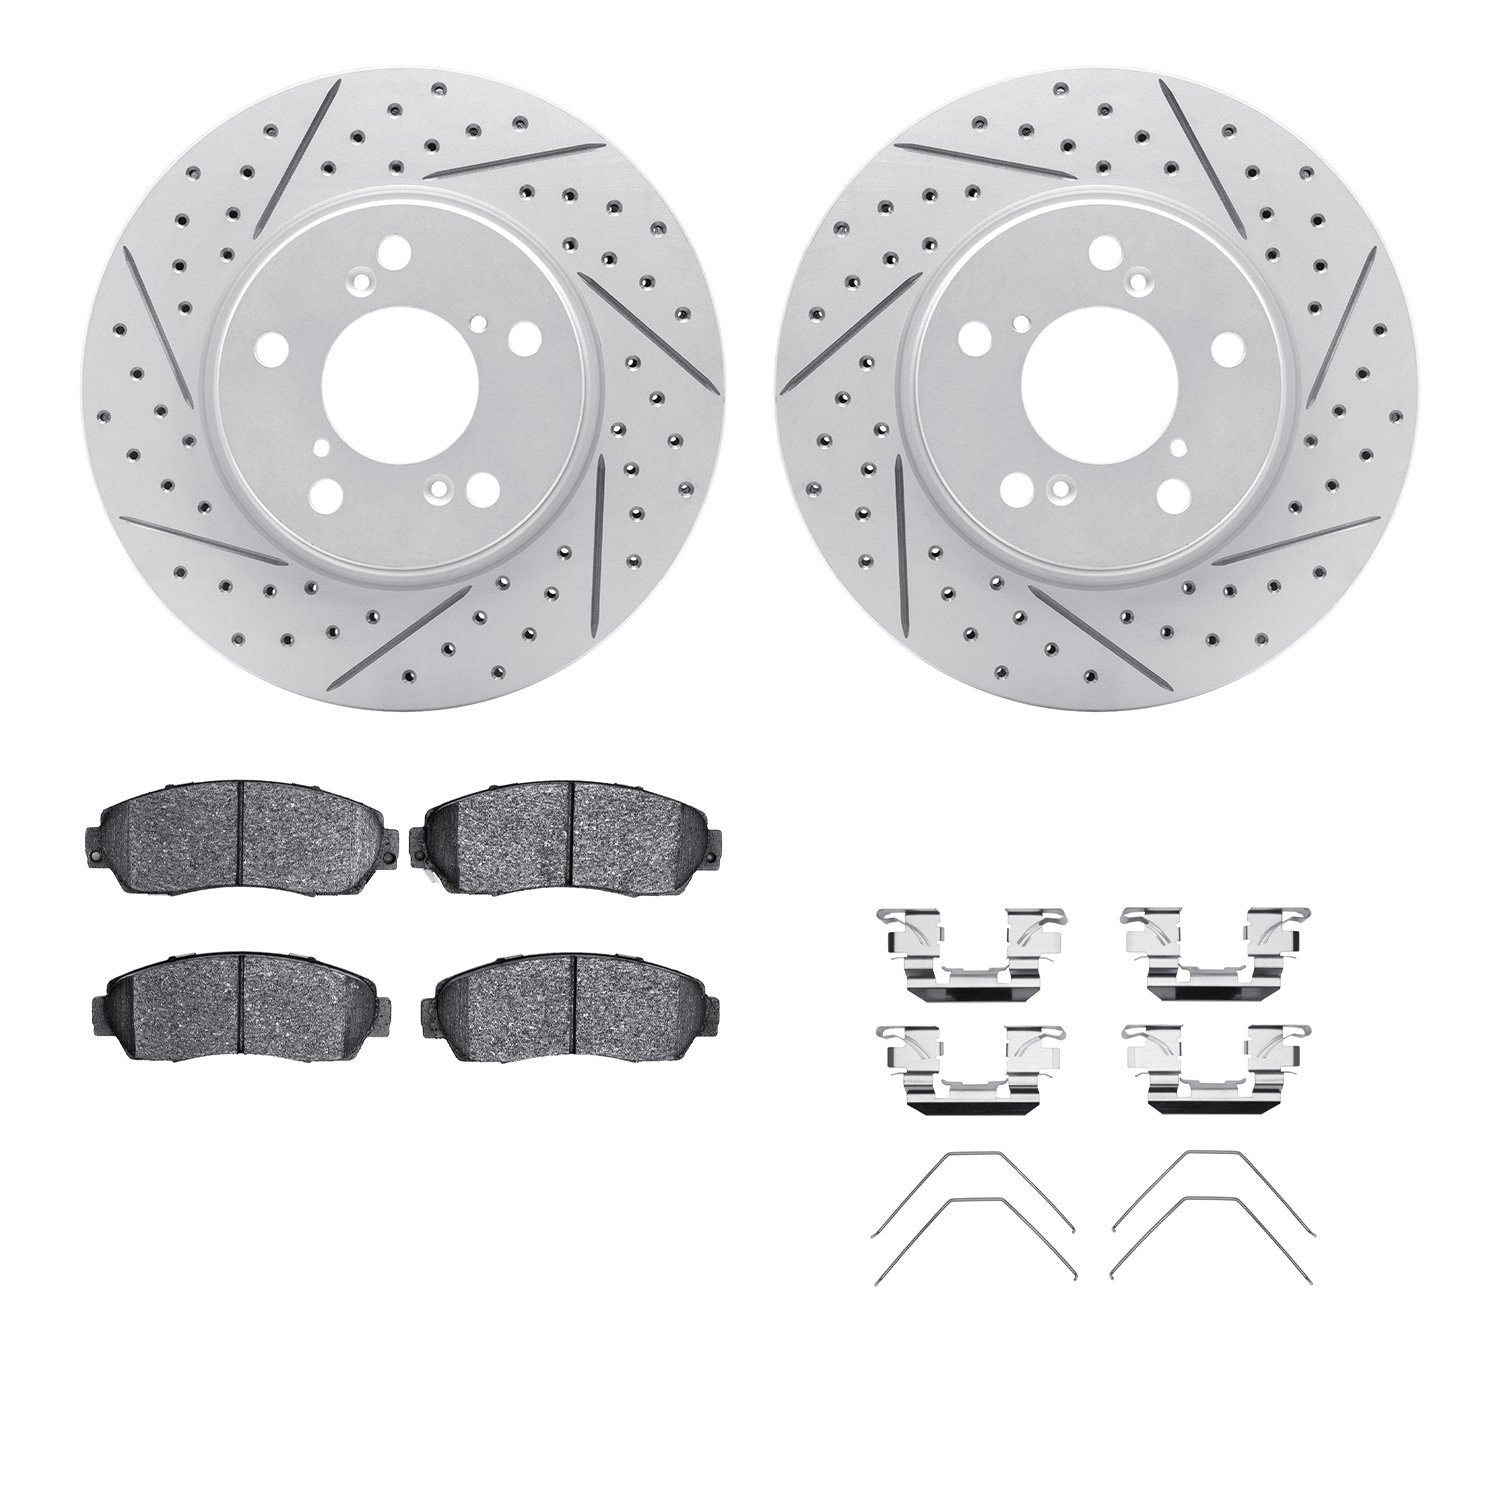 2512-59066 Geoperformance Drilled/Slotted Rotors w/5000 Advanced Brake Pads Kit & Hardware, 2005-2010 Acura/Honda, Position: Fro